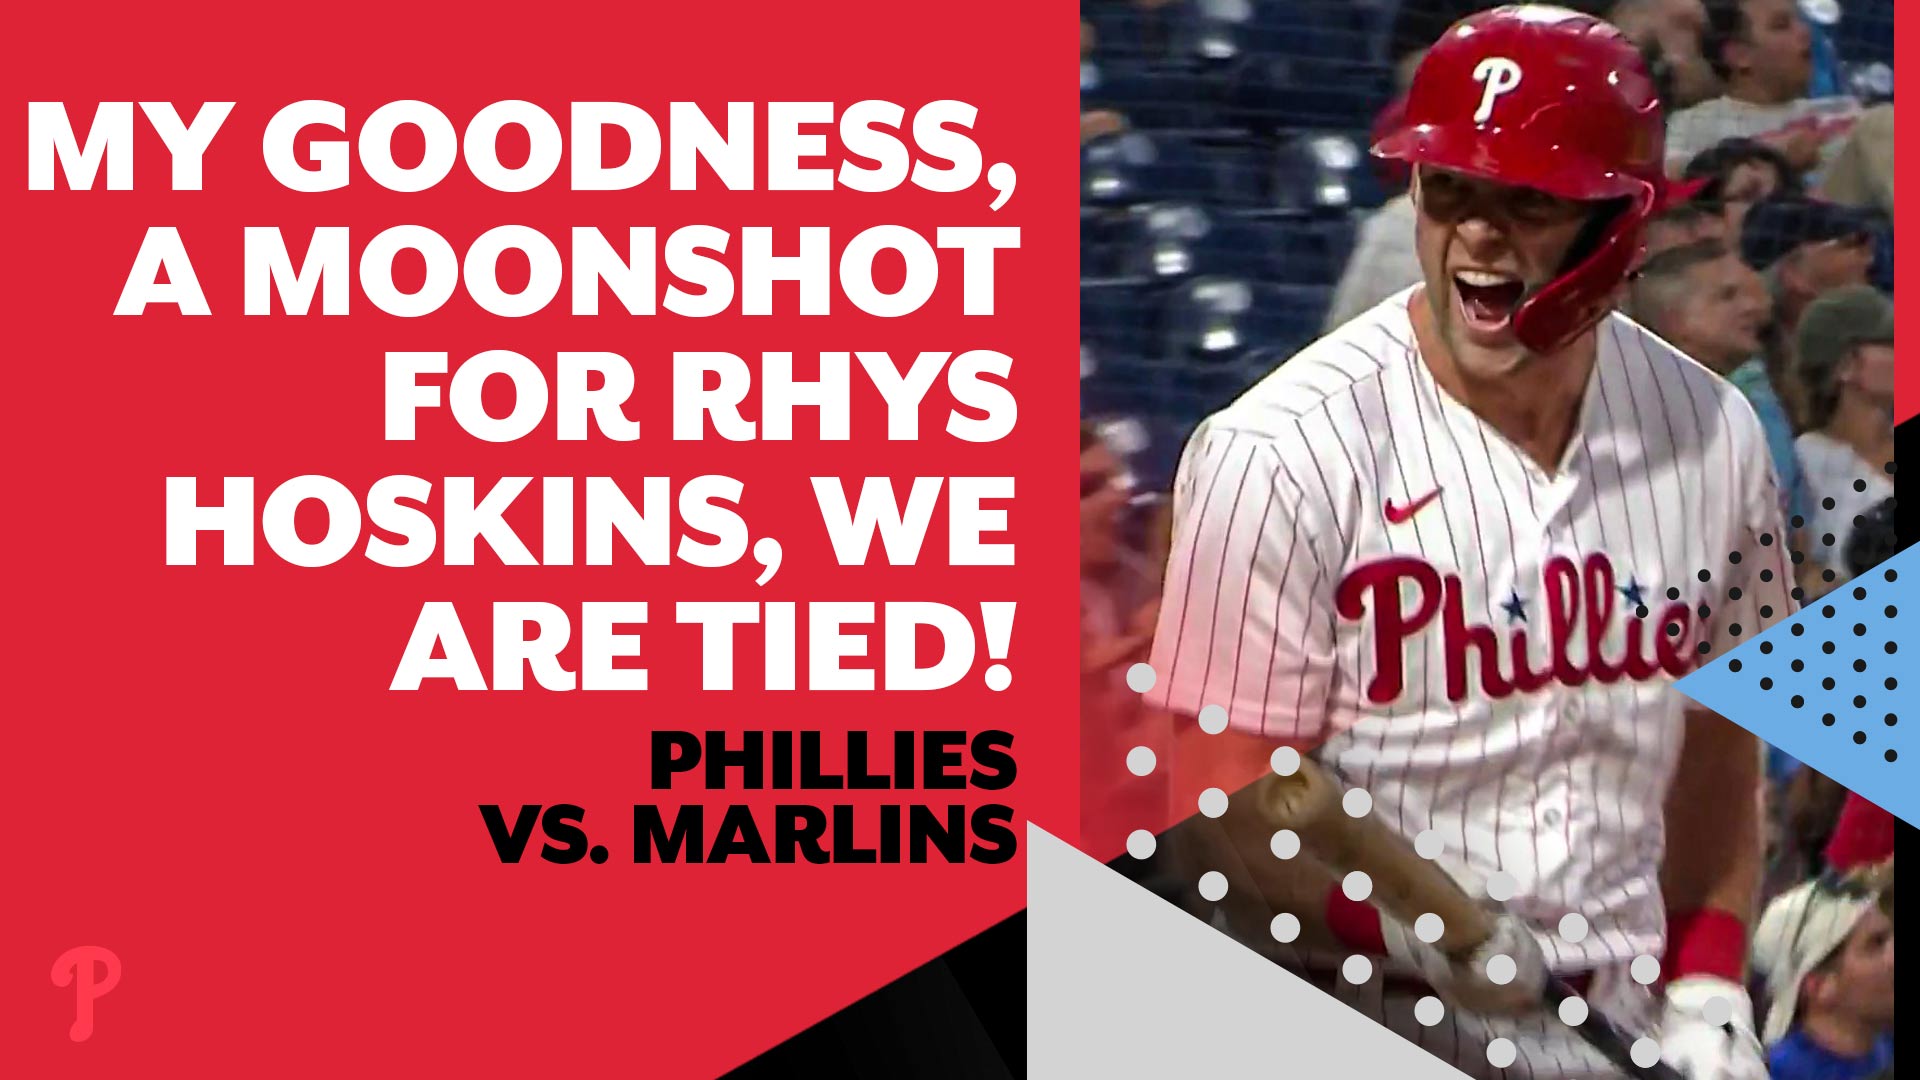 We are TIED! STAY HOT RHYS HOSKINS! He crushes a 3-run homer – NBC